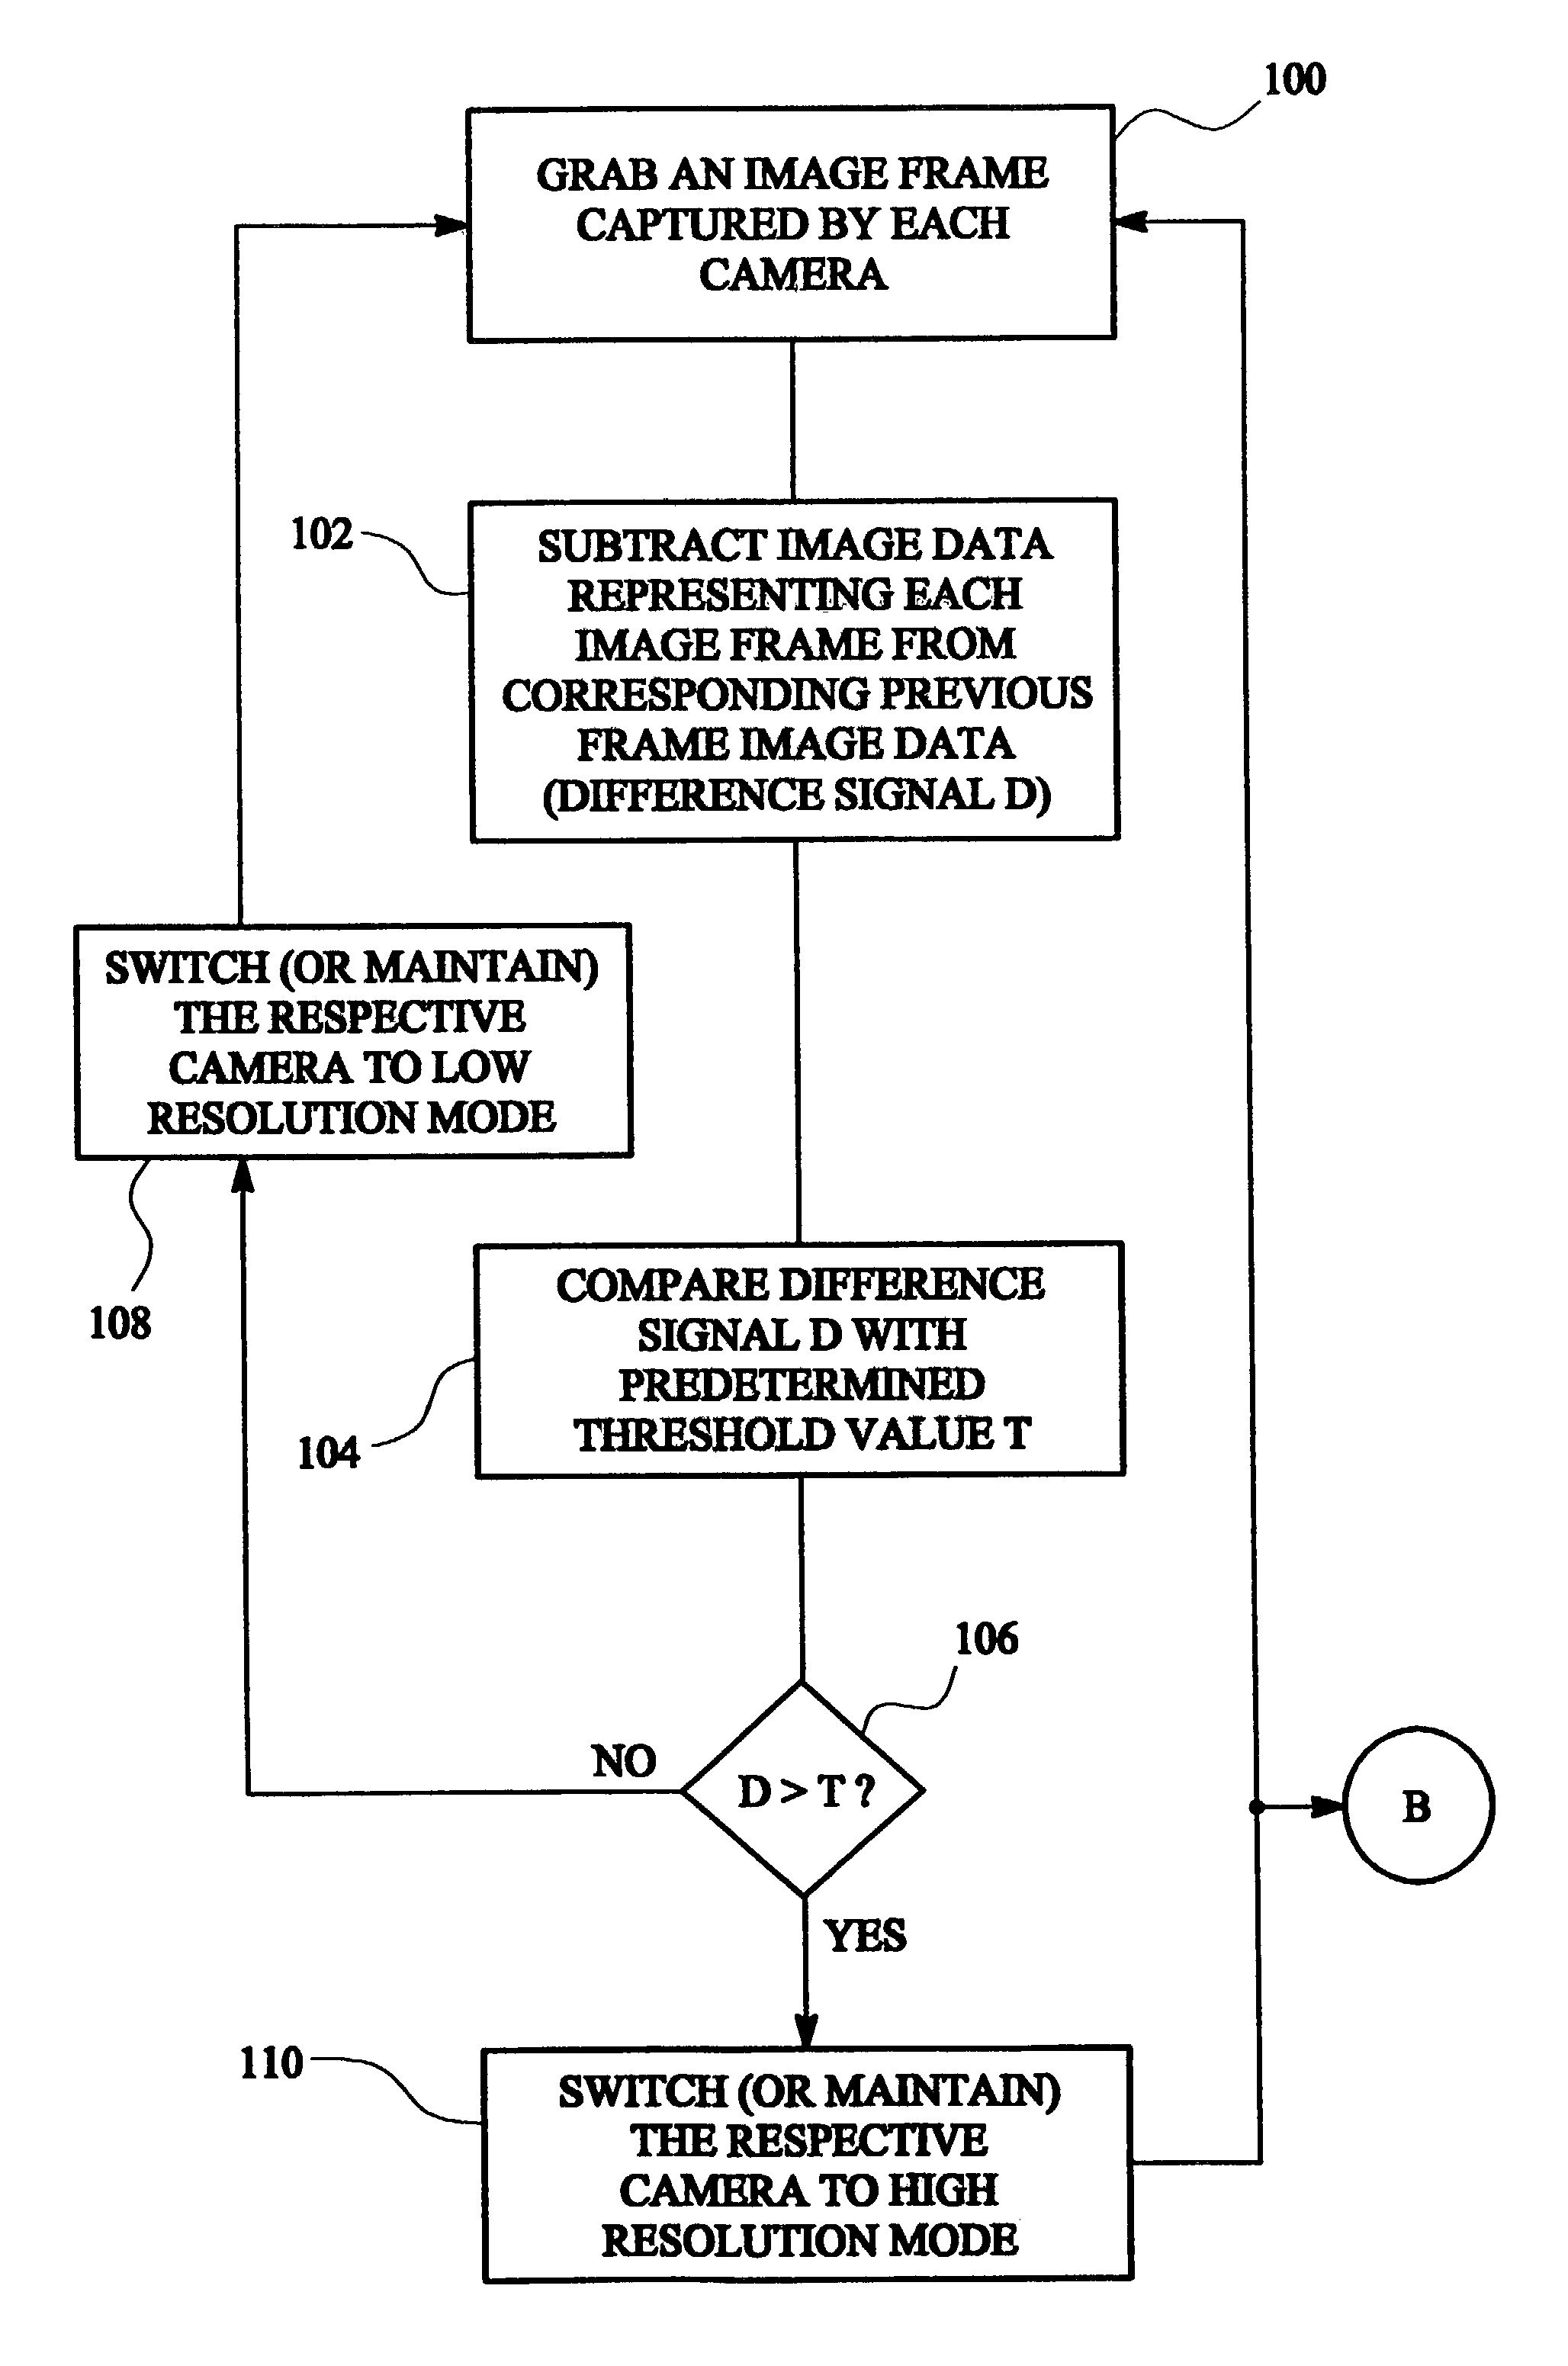 Method and apparatus for controlling a plurality of image capture devices in a surveillance system